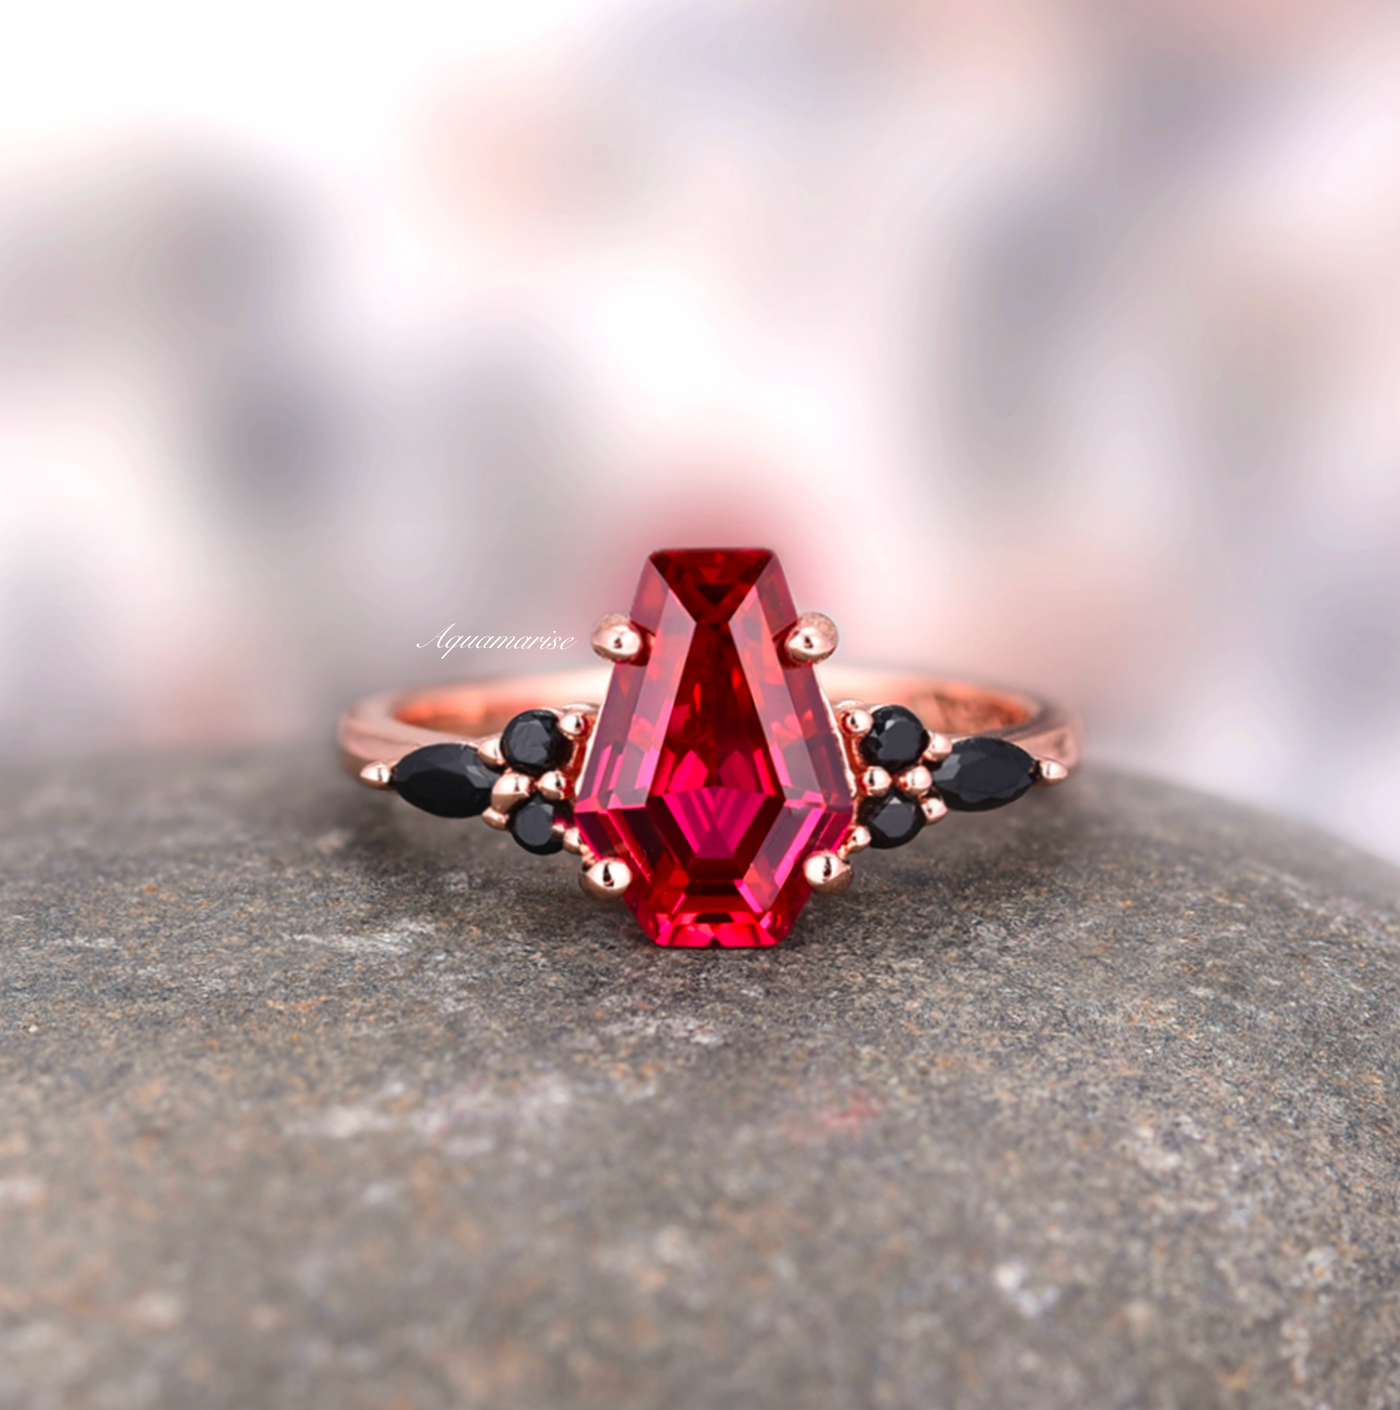 Coffin Ruby & Black Diamond Ring For Women- 14K Rose Gold Vermeil Unique Engagement Ring For Her Dainty Promise ring July Birthstone Jewelry